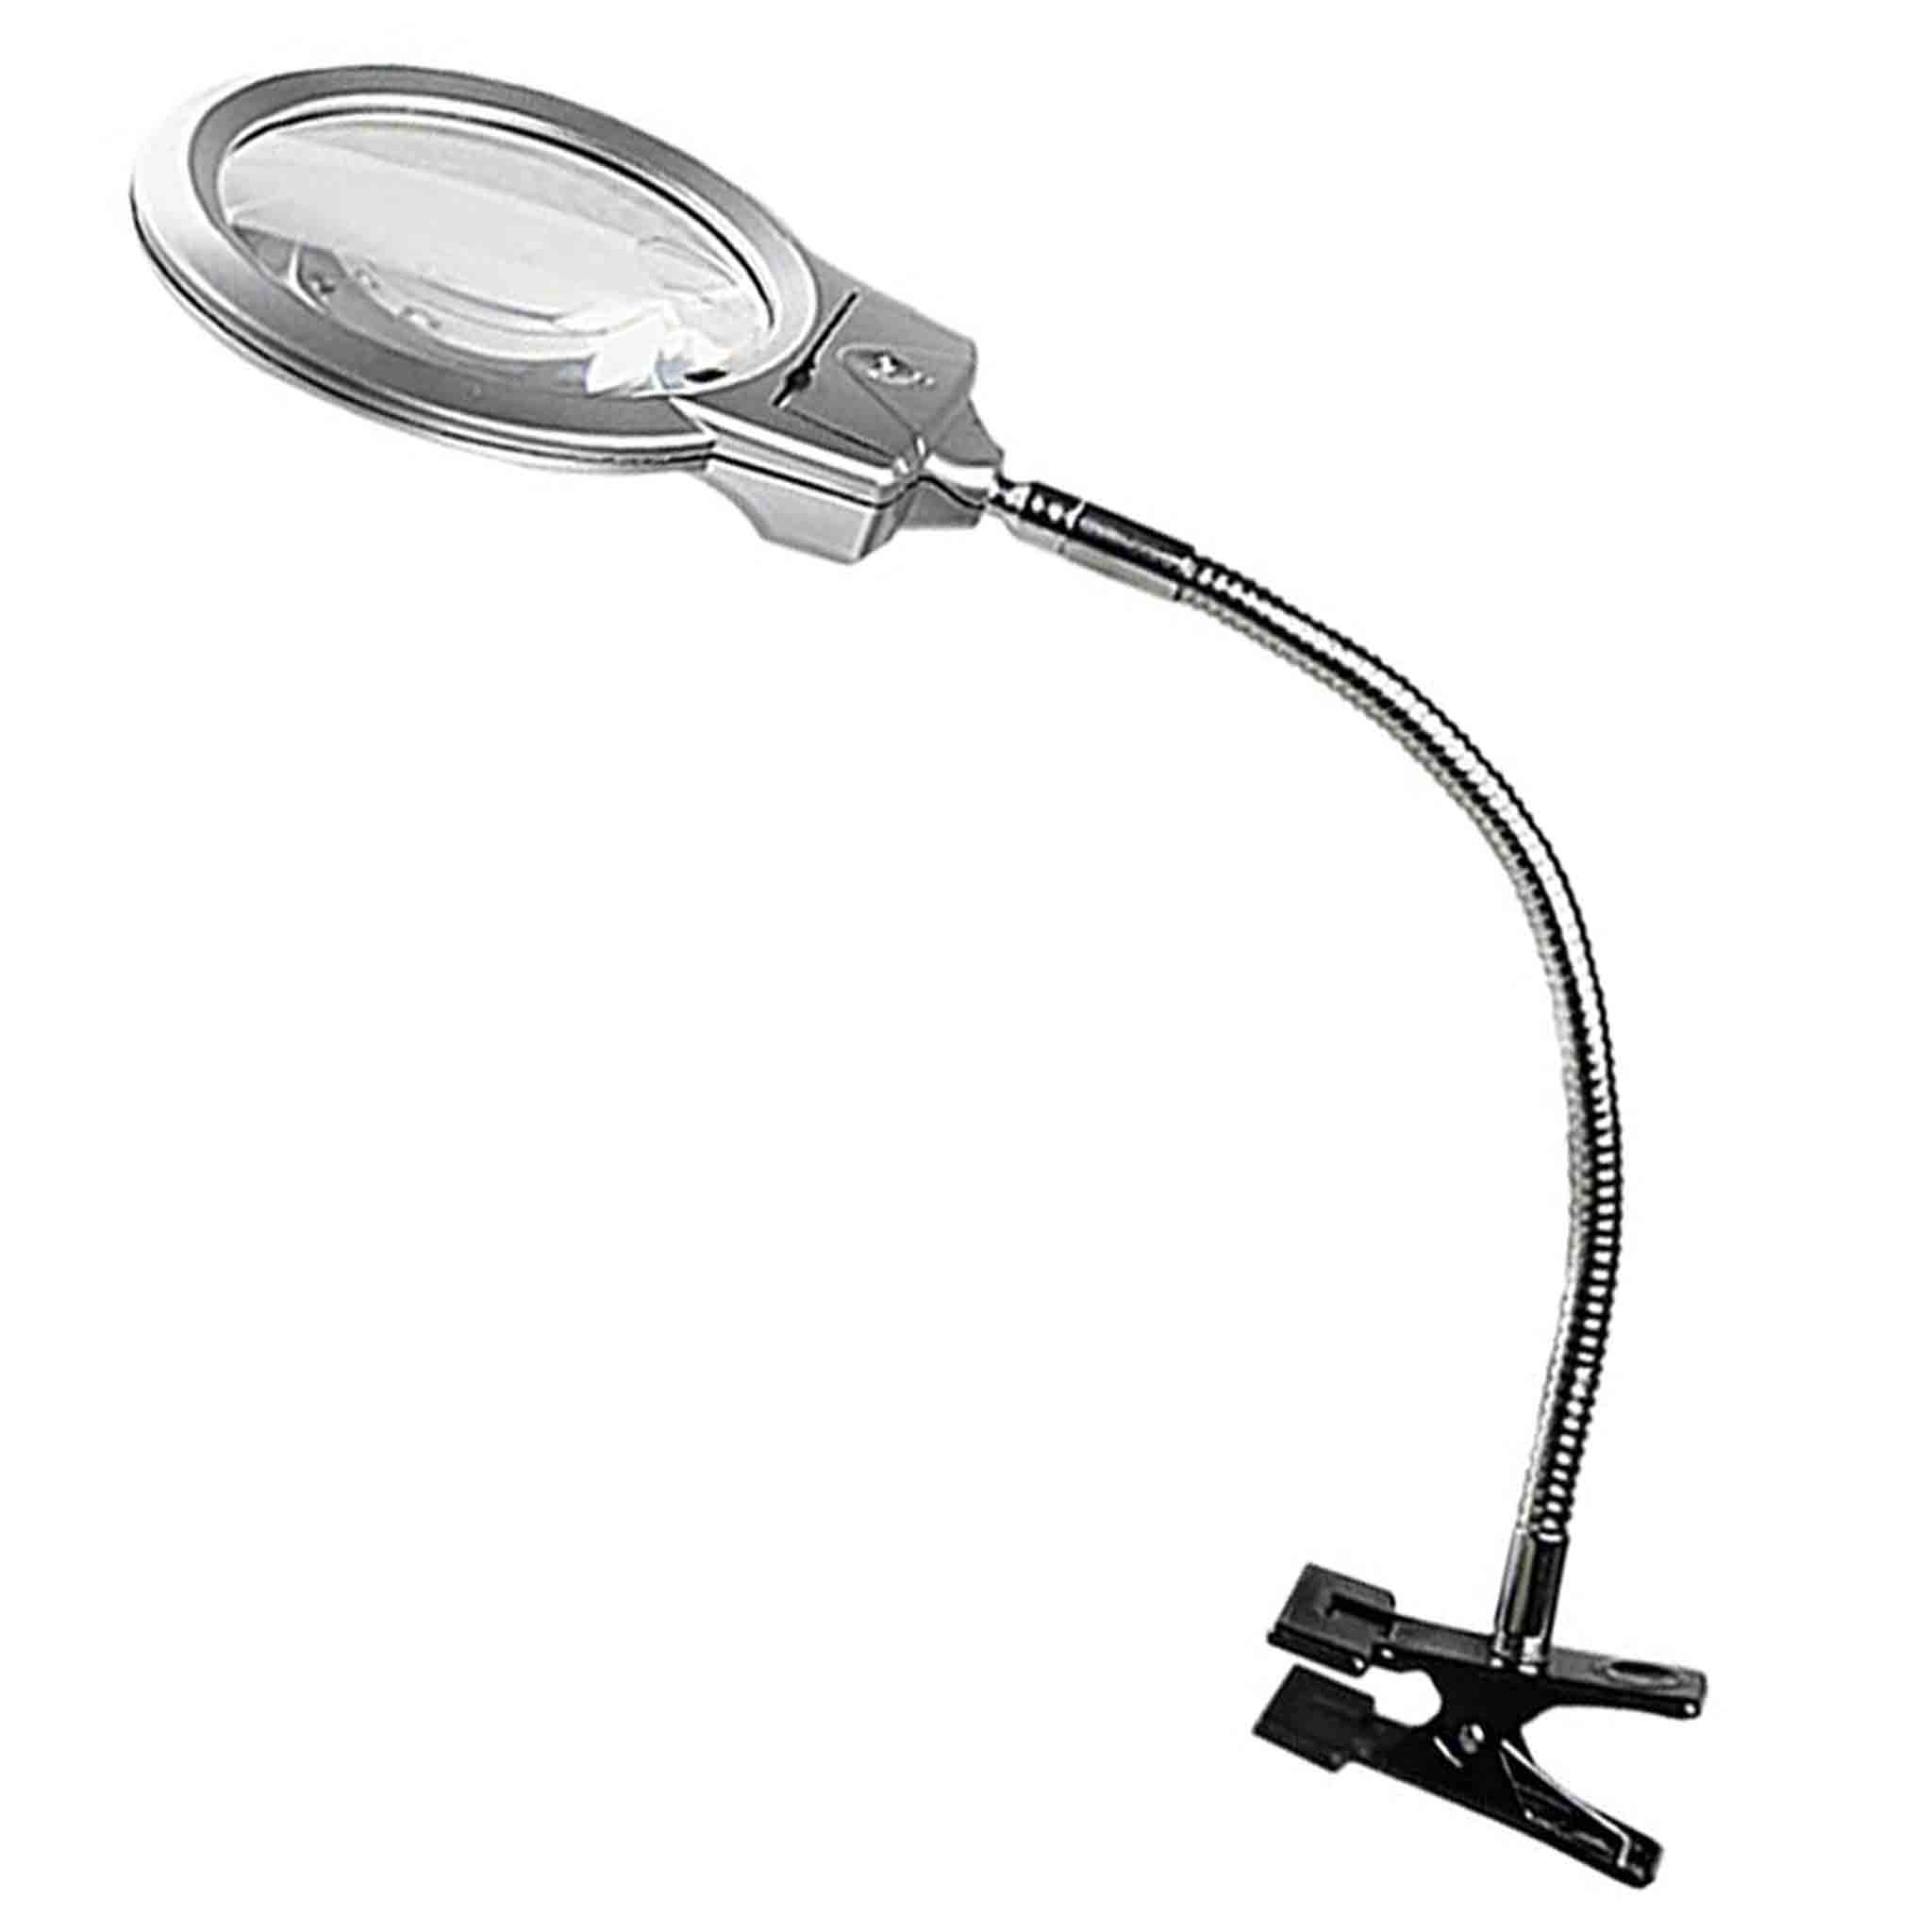 Adjustable Magnifier Glass Holding Arm with Illuminated Lens for Grafting Queen Bees - Queen collection by Buzzbee Beekeeping Supplies